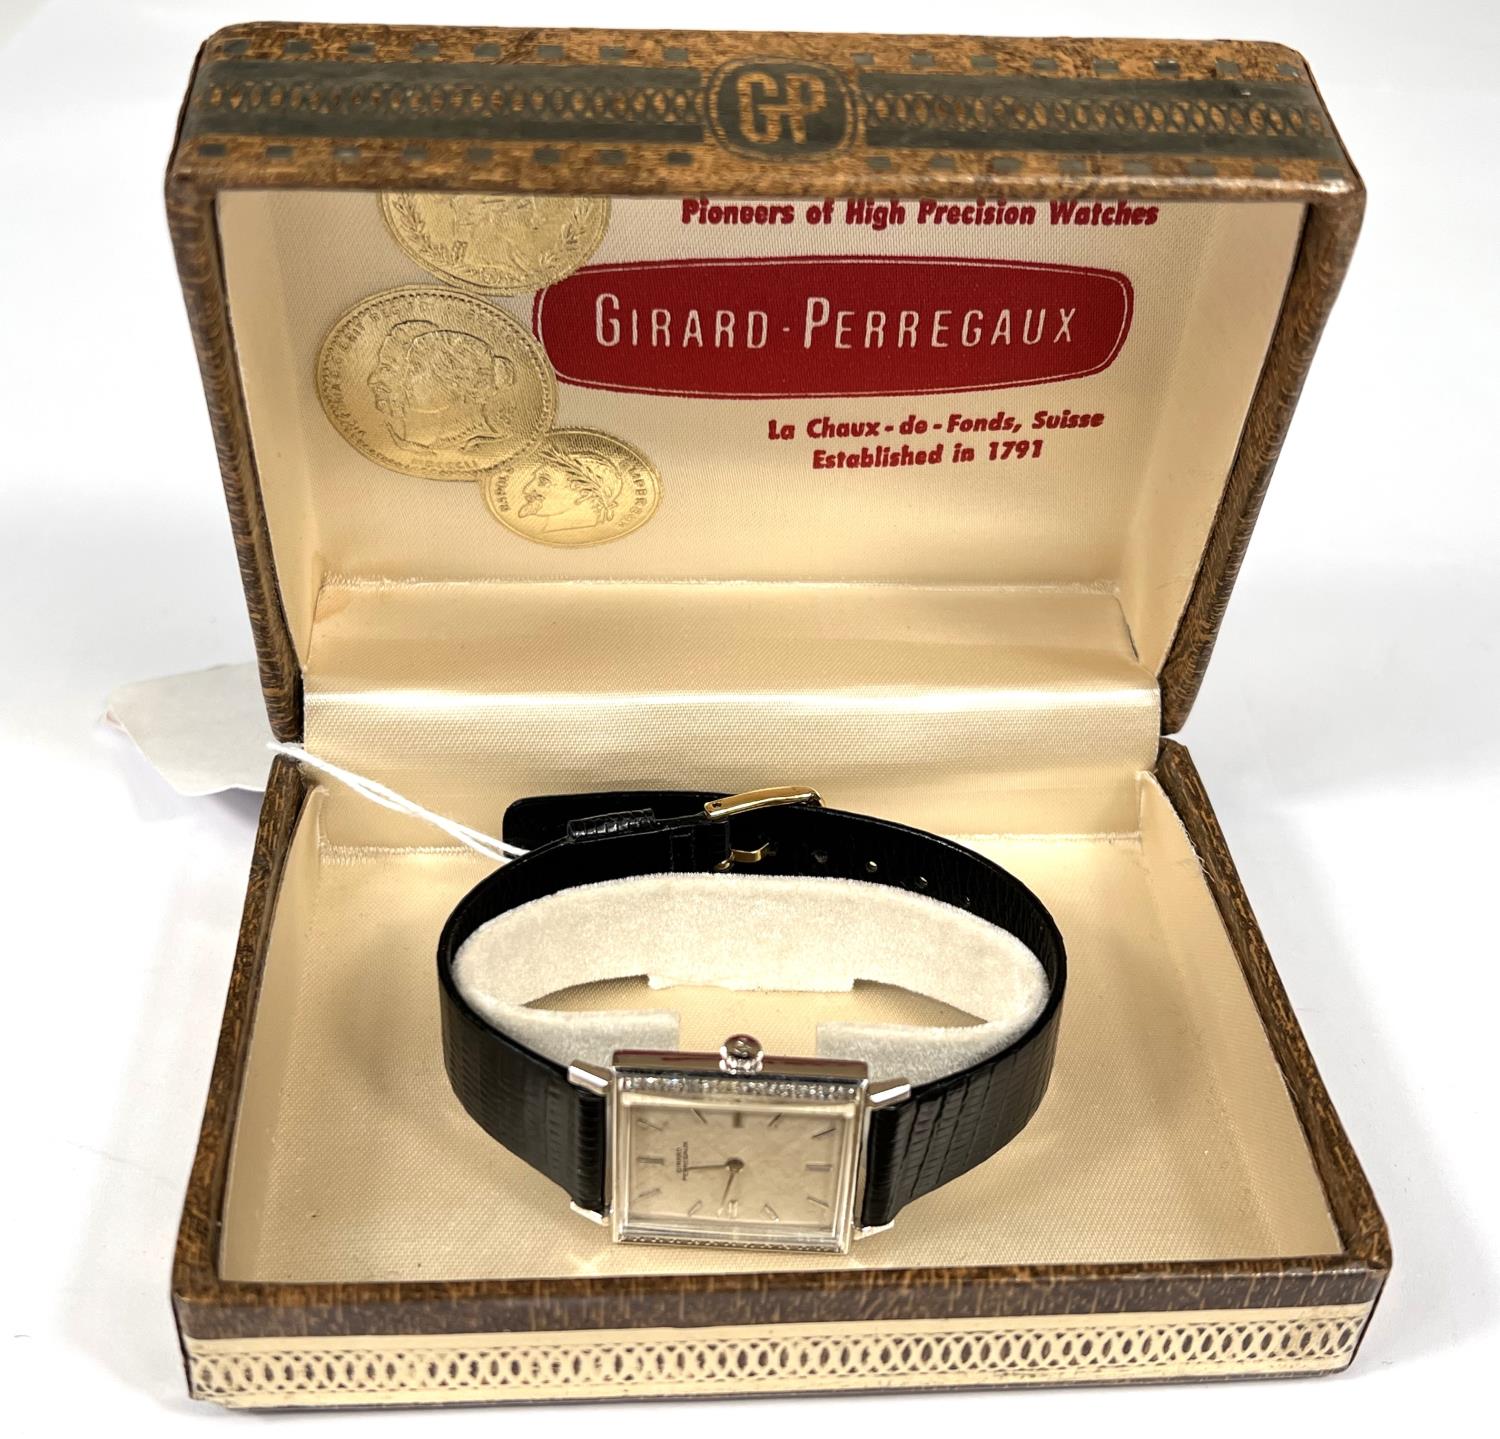 GIRARD PERREGAUX: c. 1970, a white 14ct gold cased rectangular mechanical wrist watch with